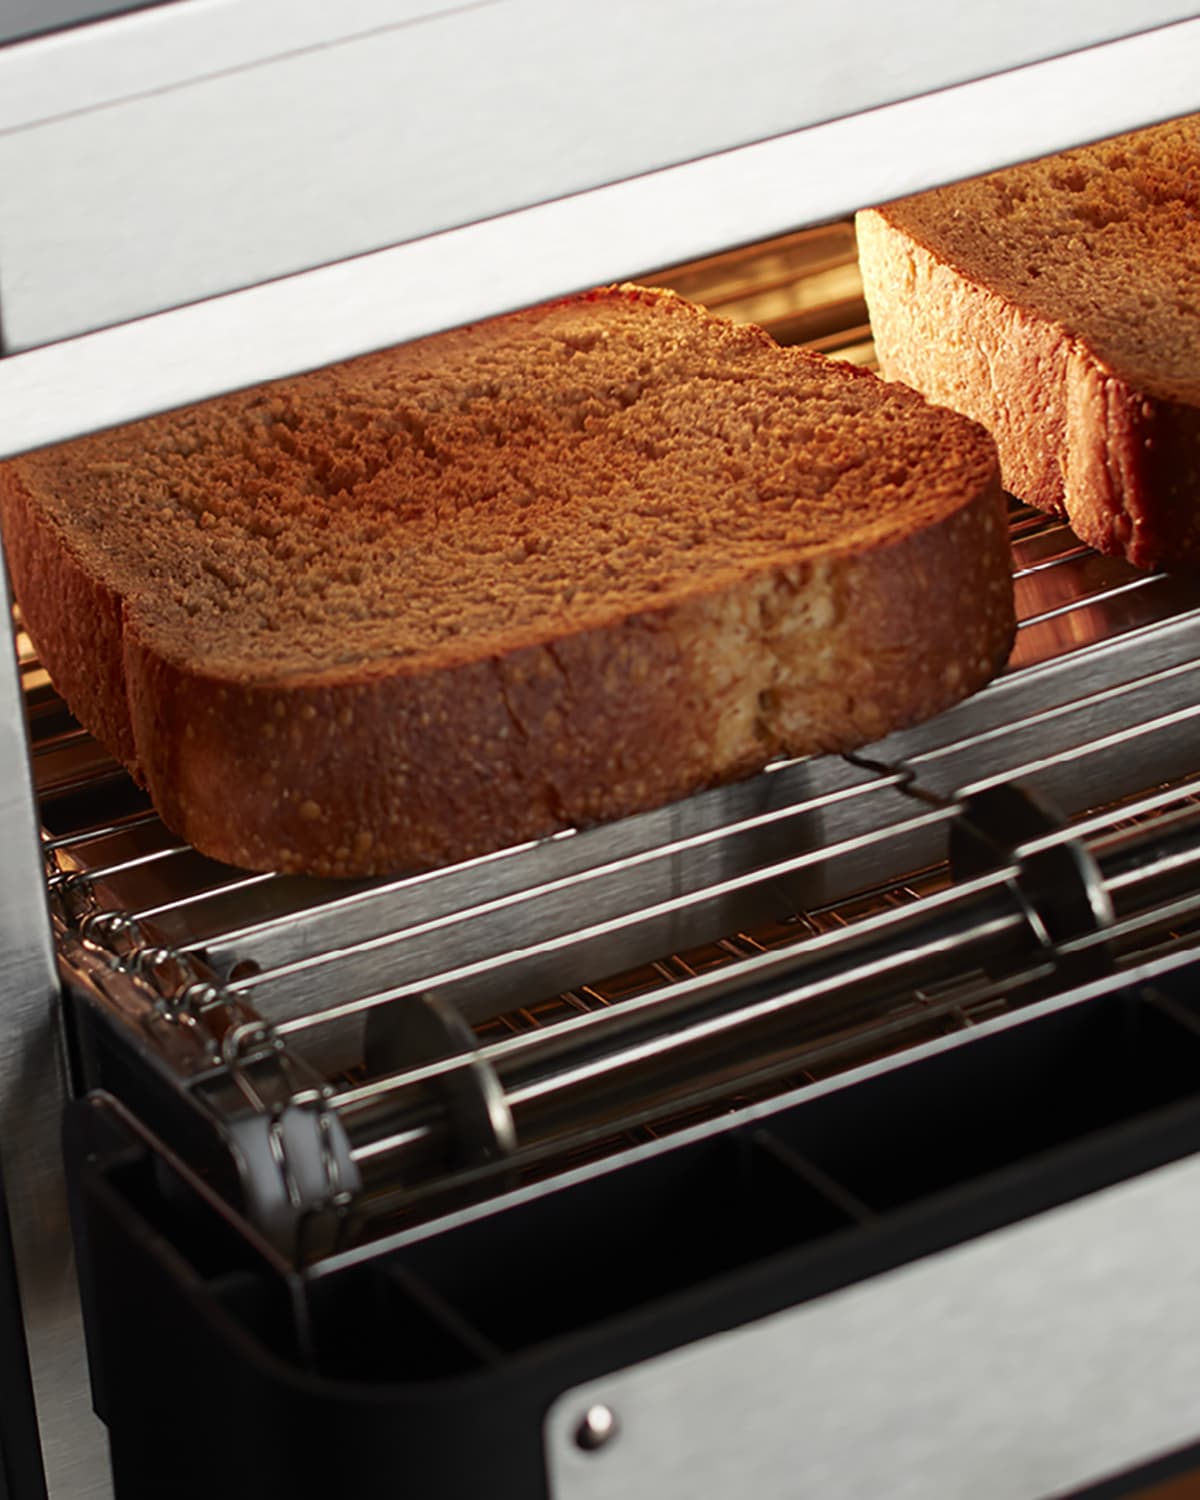 Shop All Waring Toasters